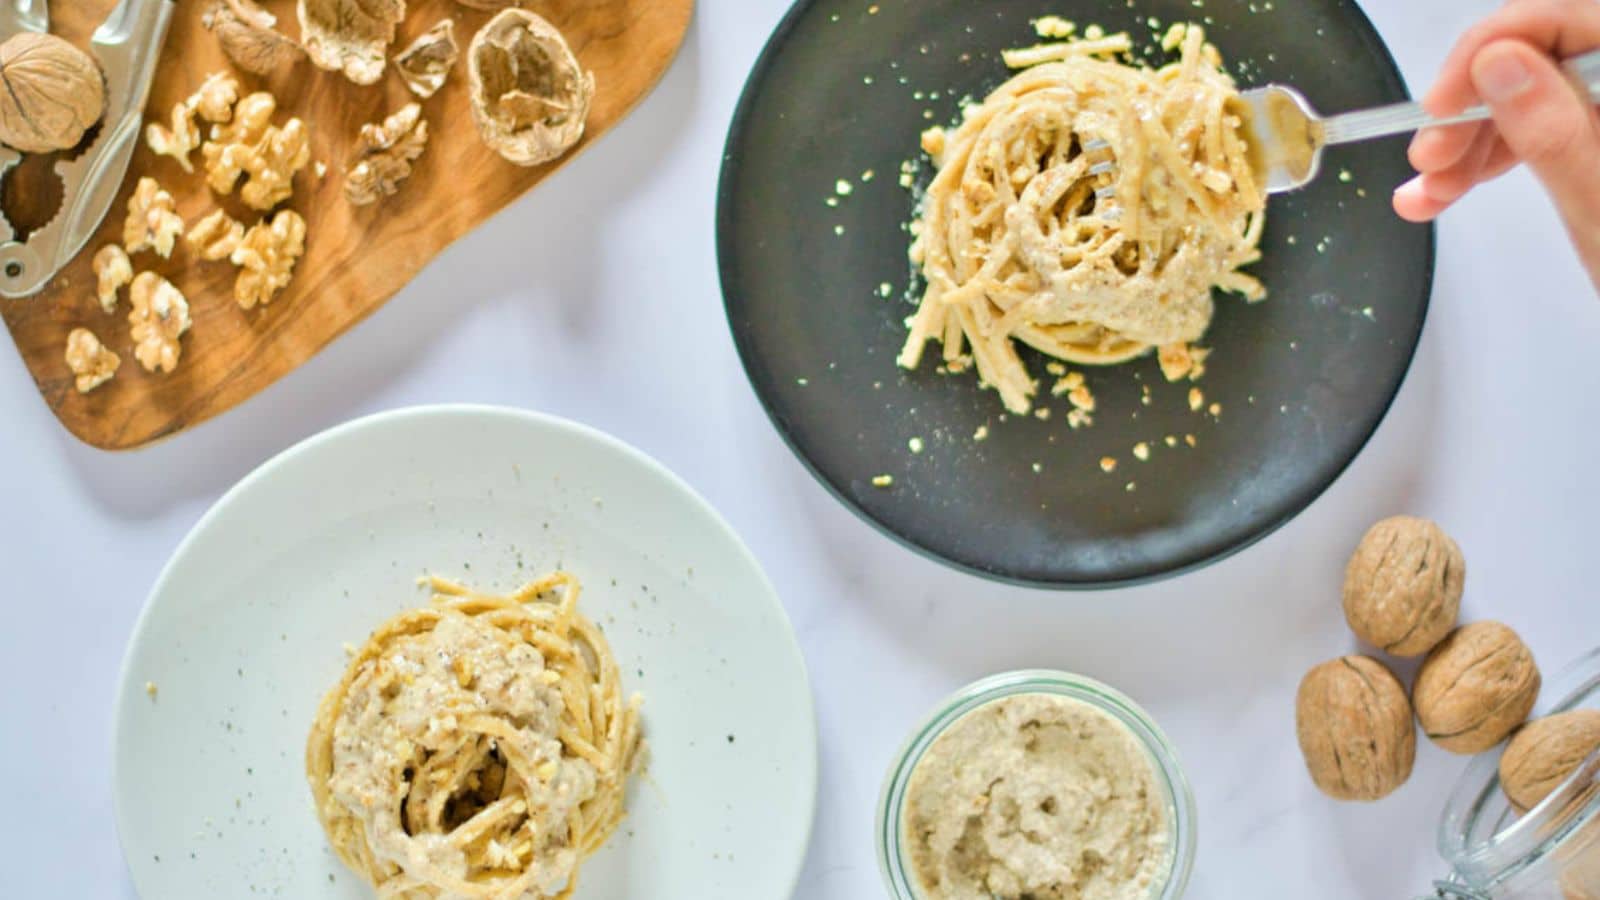 <p>Experience the rich, nutty flavors of this Italian Walnut Sauce Pasta. It’s a simple yet elegant dish, perfect for a quick and satisfying Thursday meal. This pasta brings a touch of Italian gourmet to your dinner table with minimal effort.<br><strong>Get the Recipe: </strong><a href="https://twocityvegans.com/vegan-walnut-sauce-pasta/?utm_source=msn&utm_medium=page&utm_campaign=msn" rel="noopener">Italian Walnut Sauce Pasta</a></p>